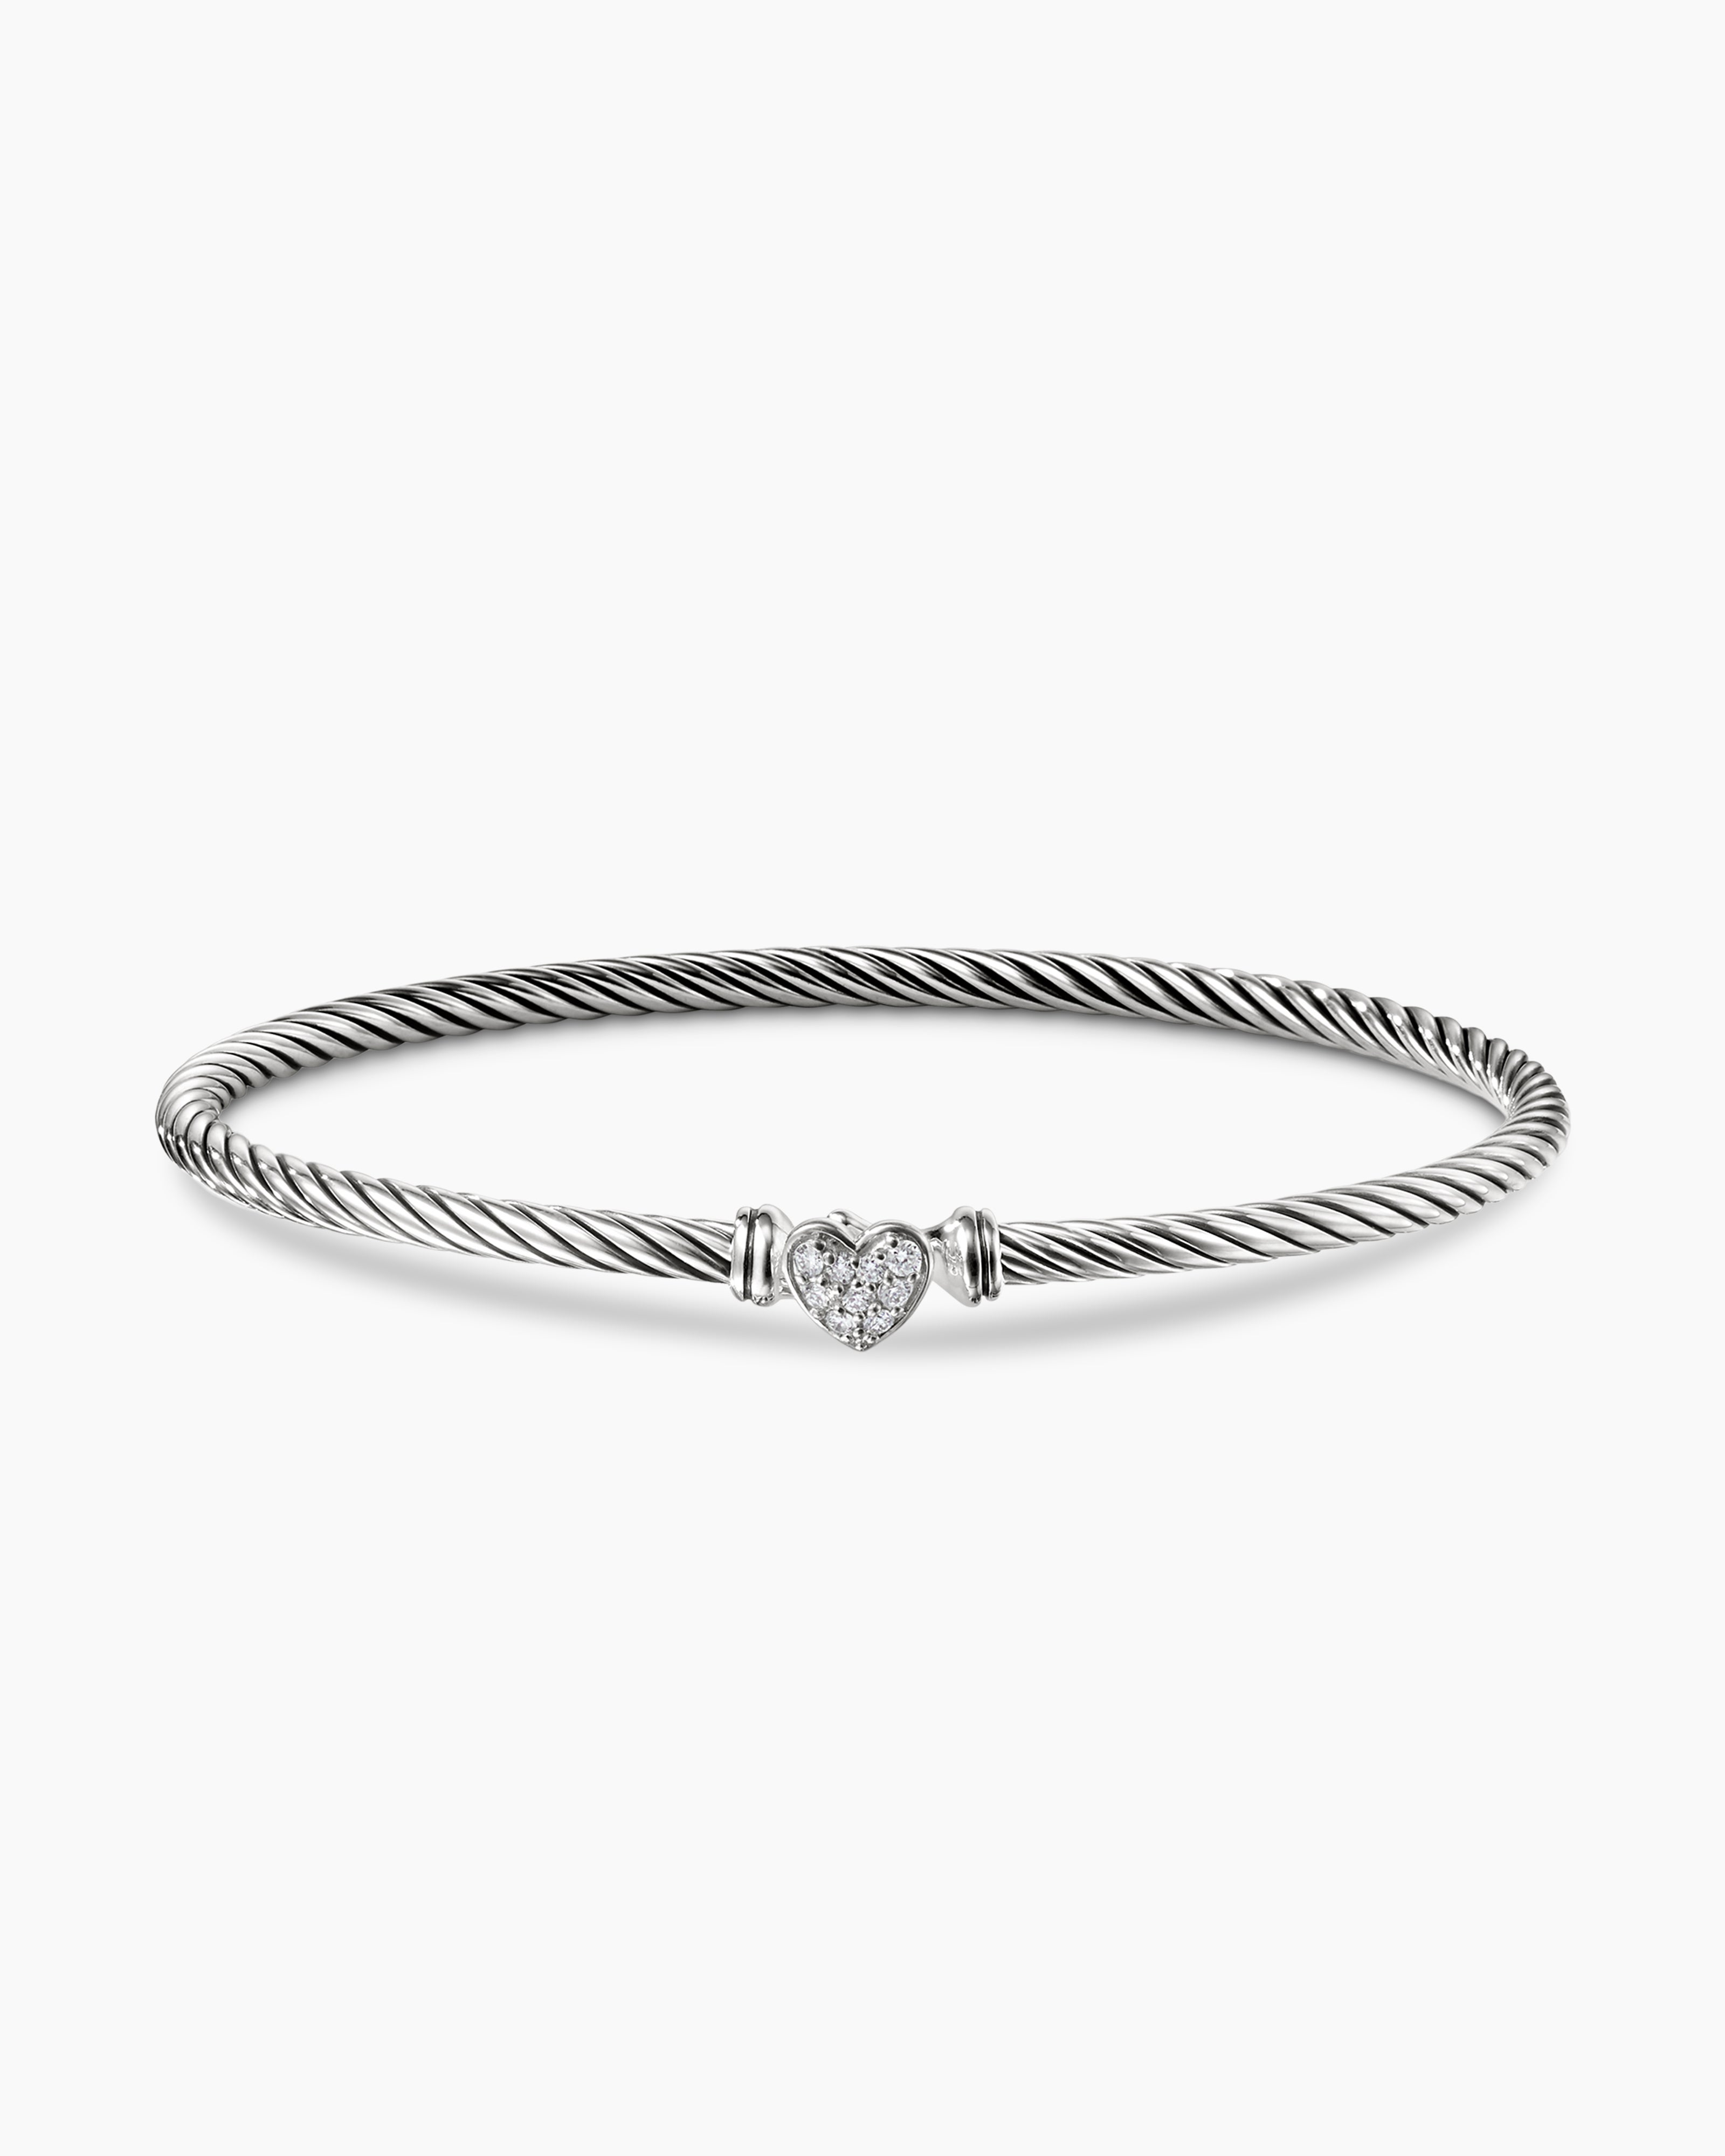 David Yurman 925 Sterling Silver 5mm Woven Rounded Box Link Bracelet 8.5''  | Barry's Pawn and Jewelry